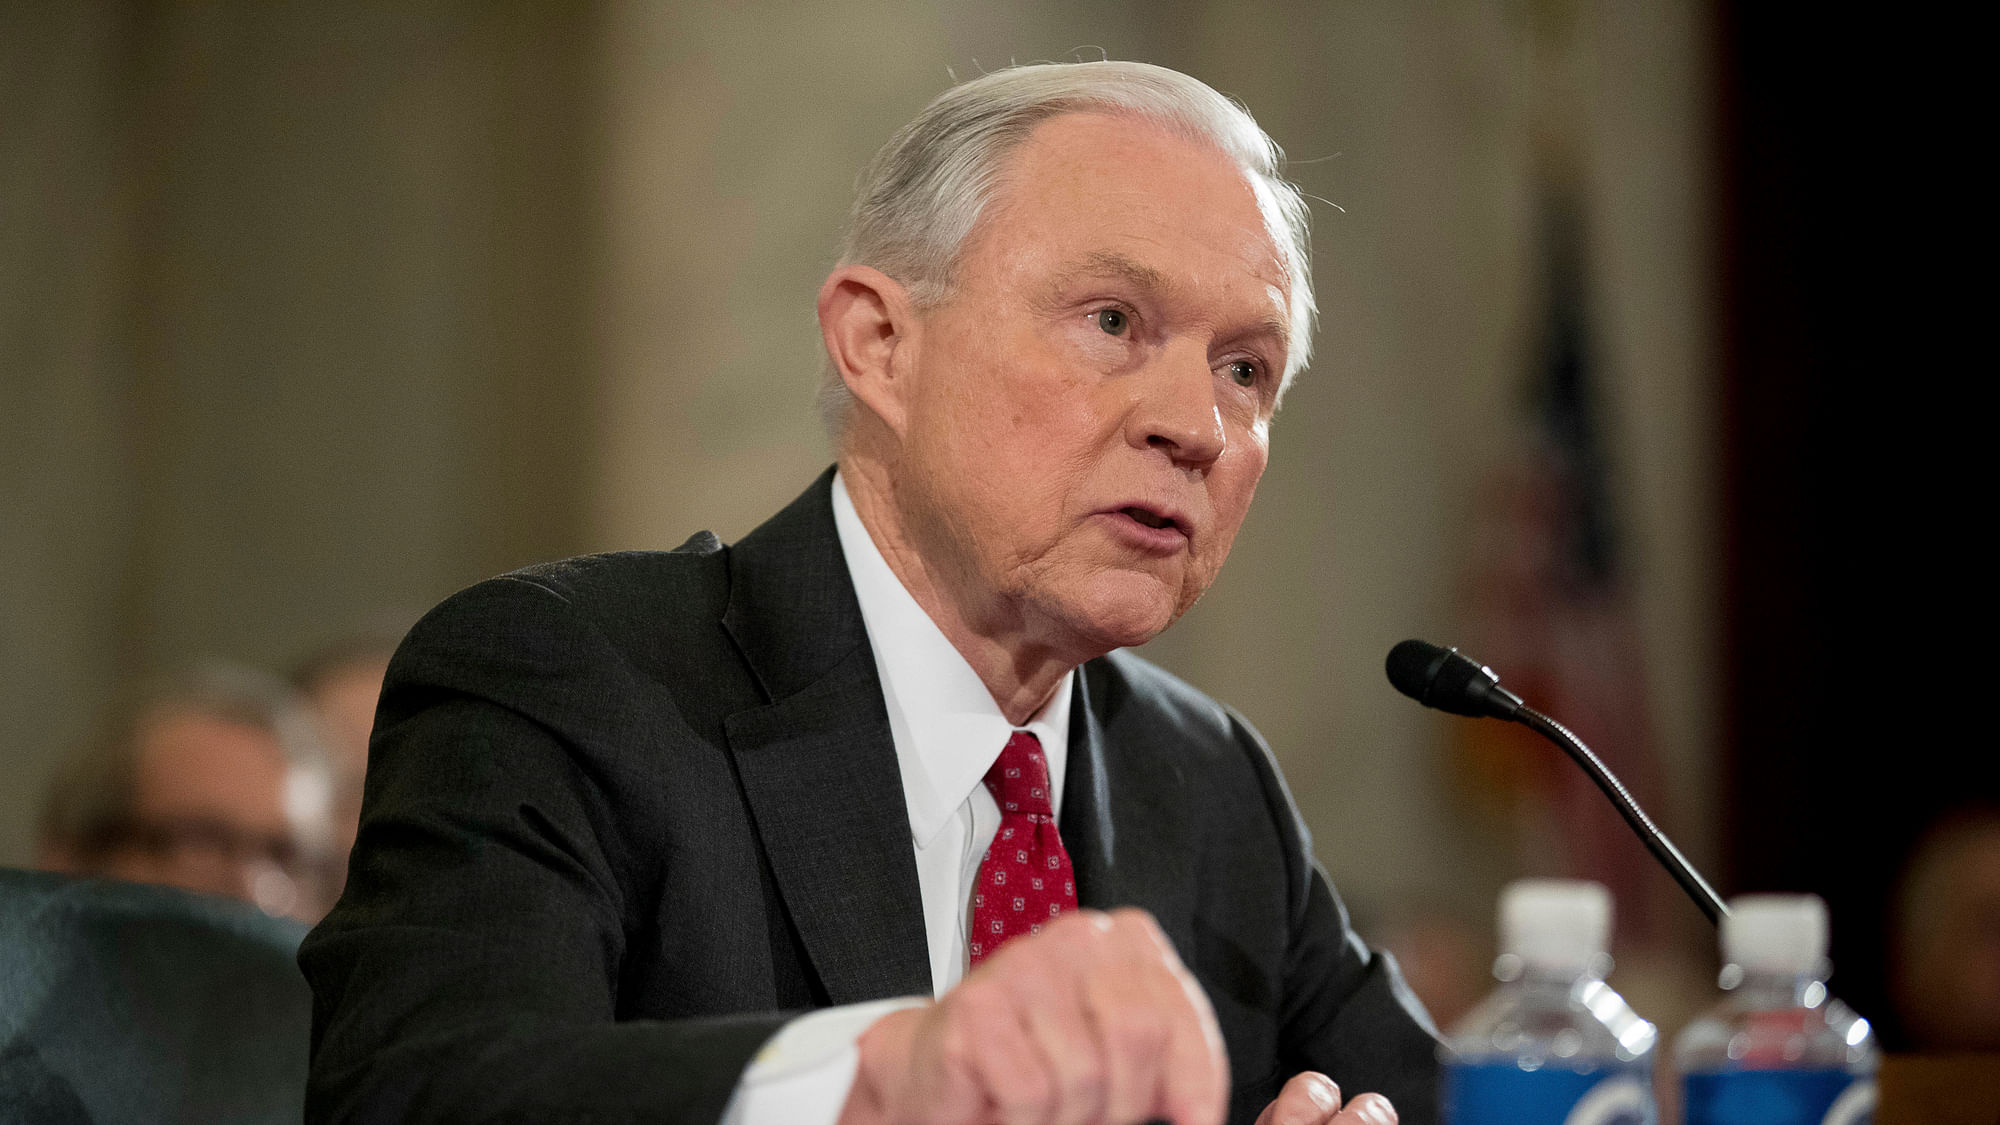 Sessions’ record of controversial positions on race, immigration and criminal justice reform have sparked alarm. (Photo: AP)